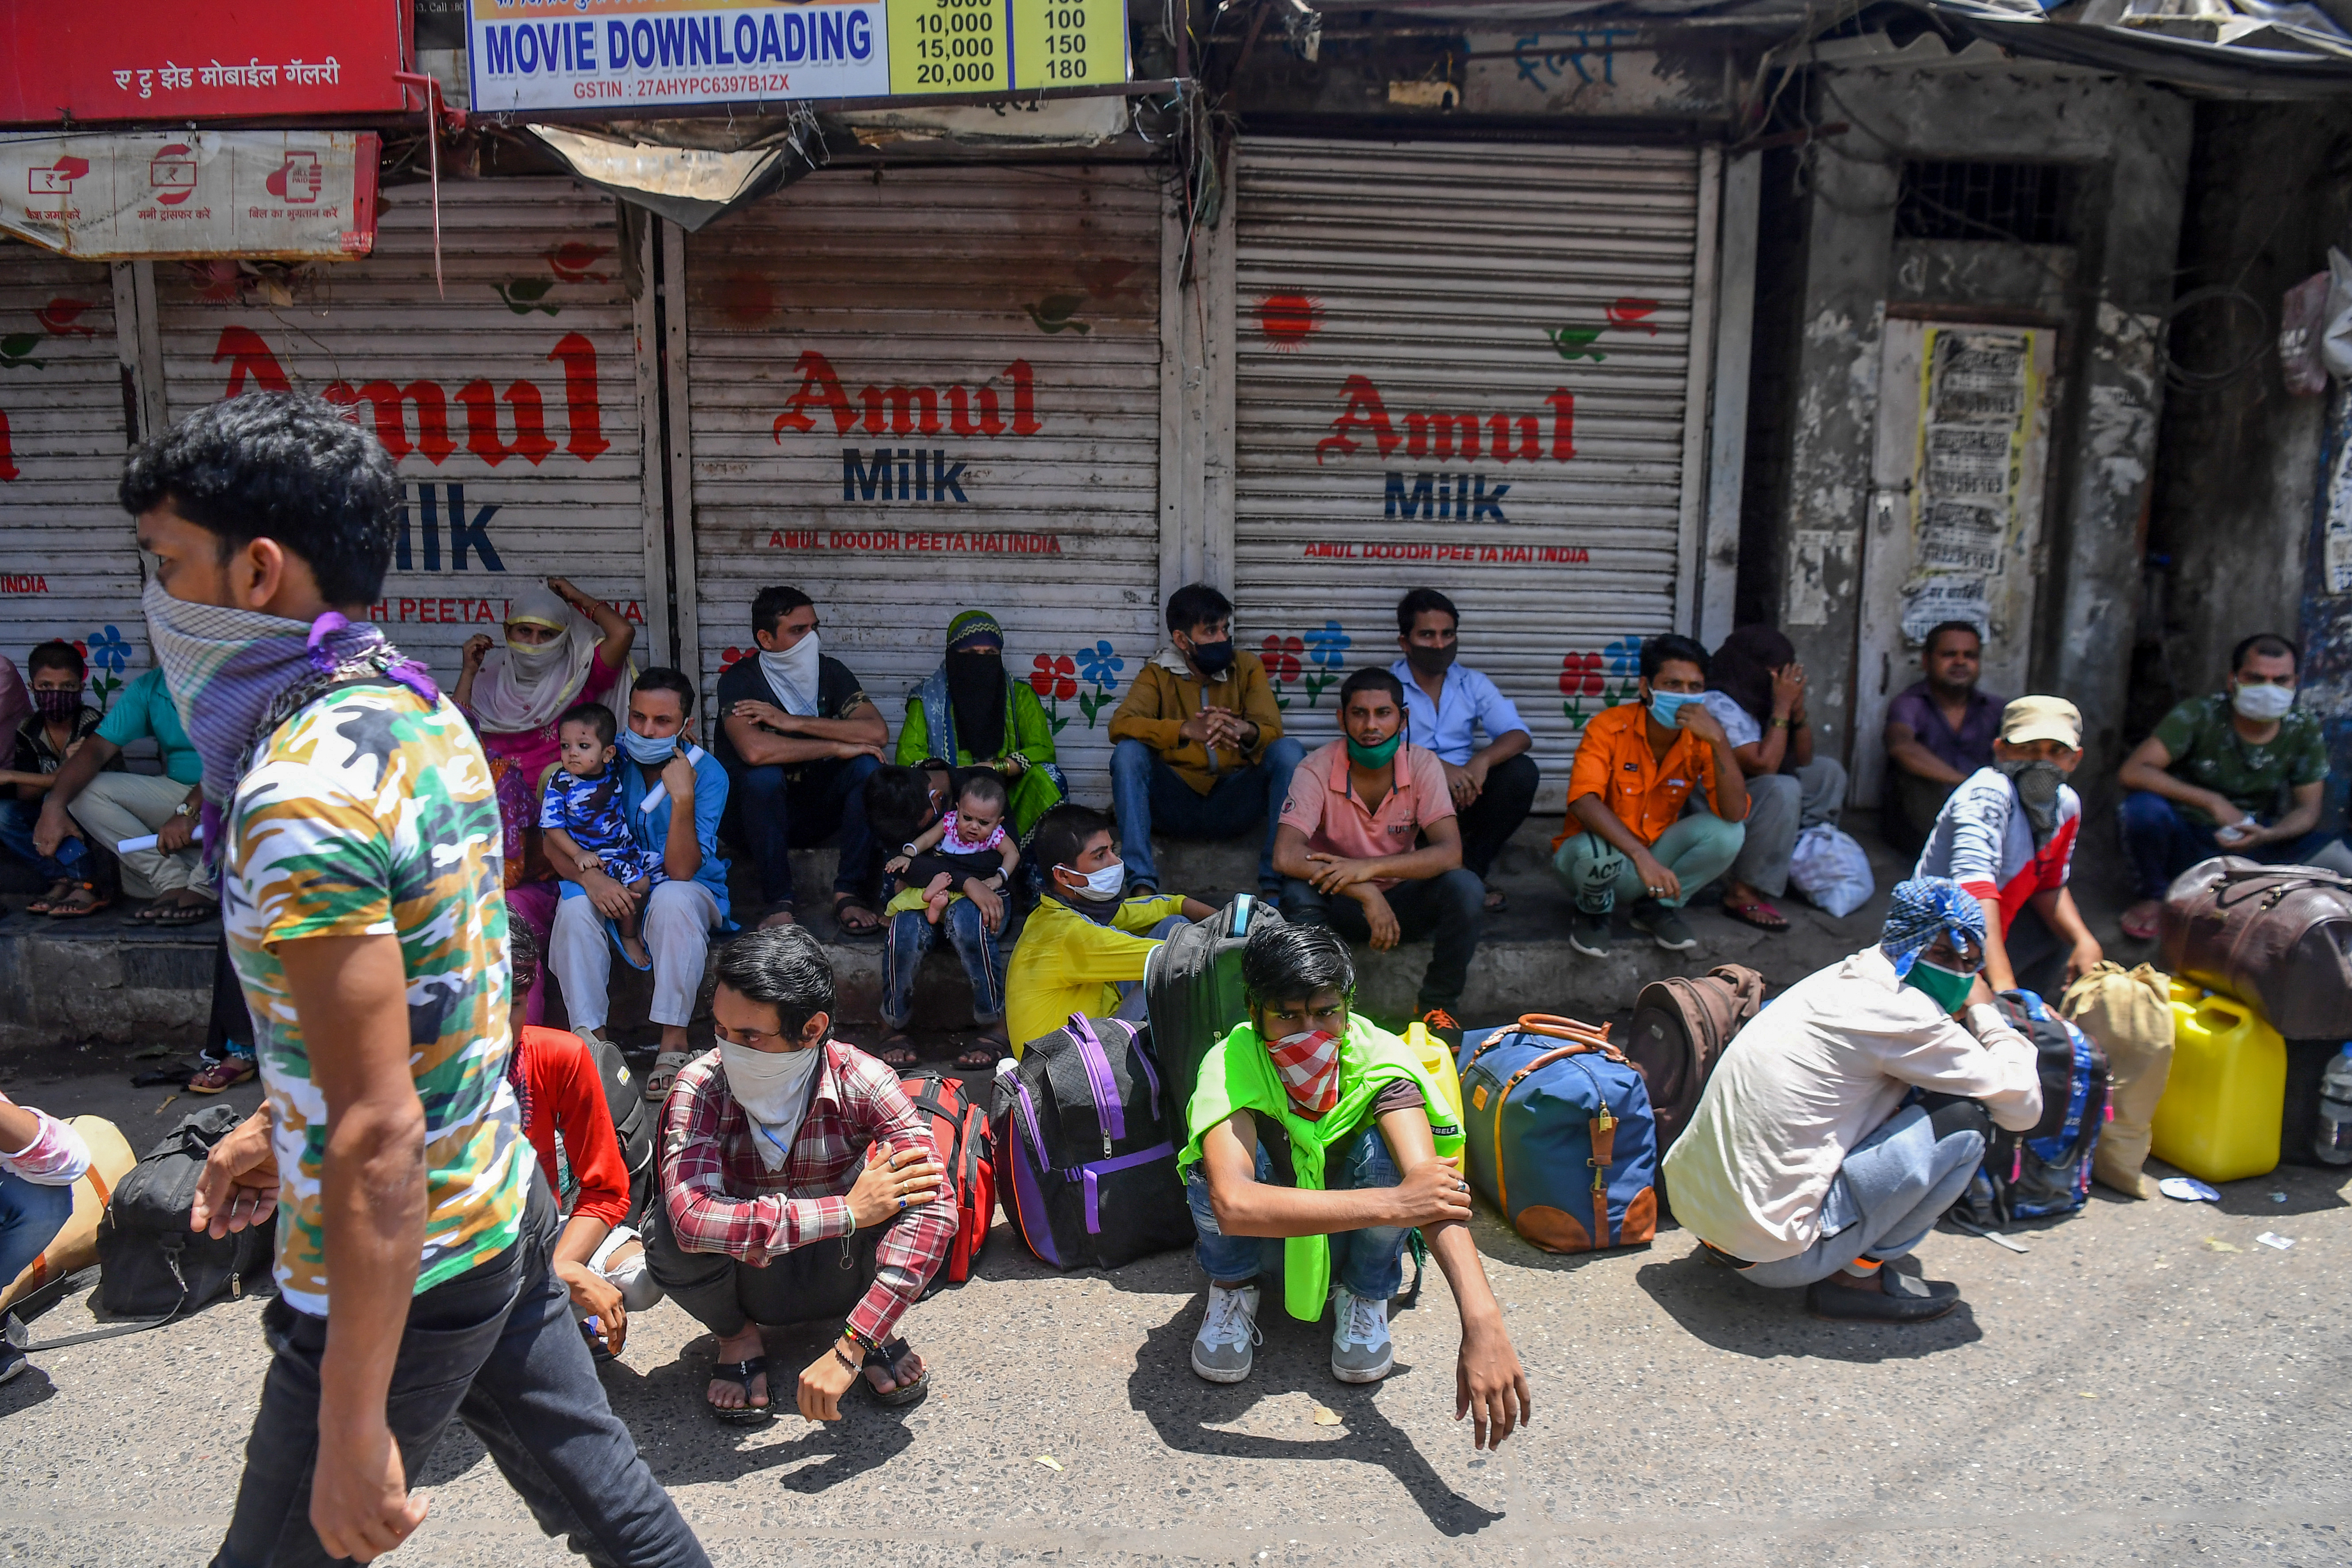 MUMBAI: Migrant workers and families wait outside Dharavi slums for transportation to a railway terminus to catch a train back home after the government eased a nationwide lockdown imposed against the COVID-19 coronavirus, in Mumbai.—AFP